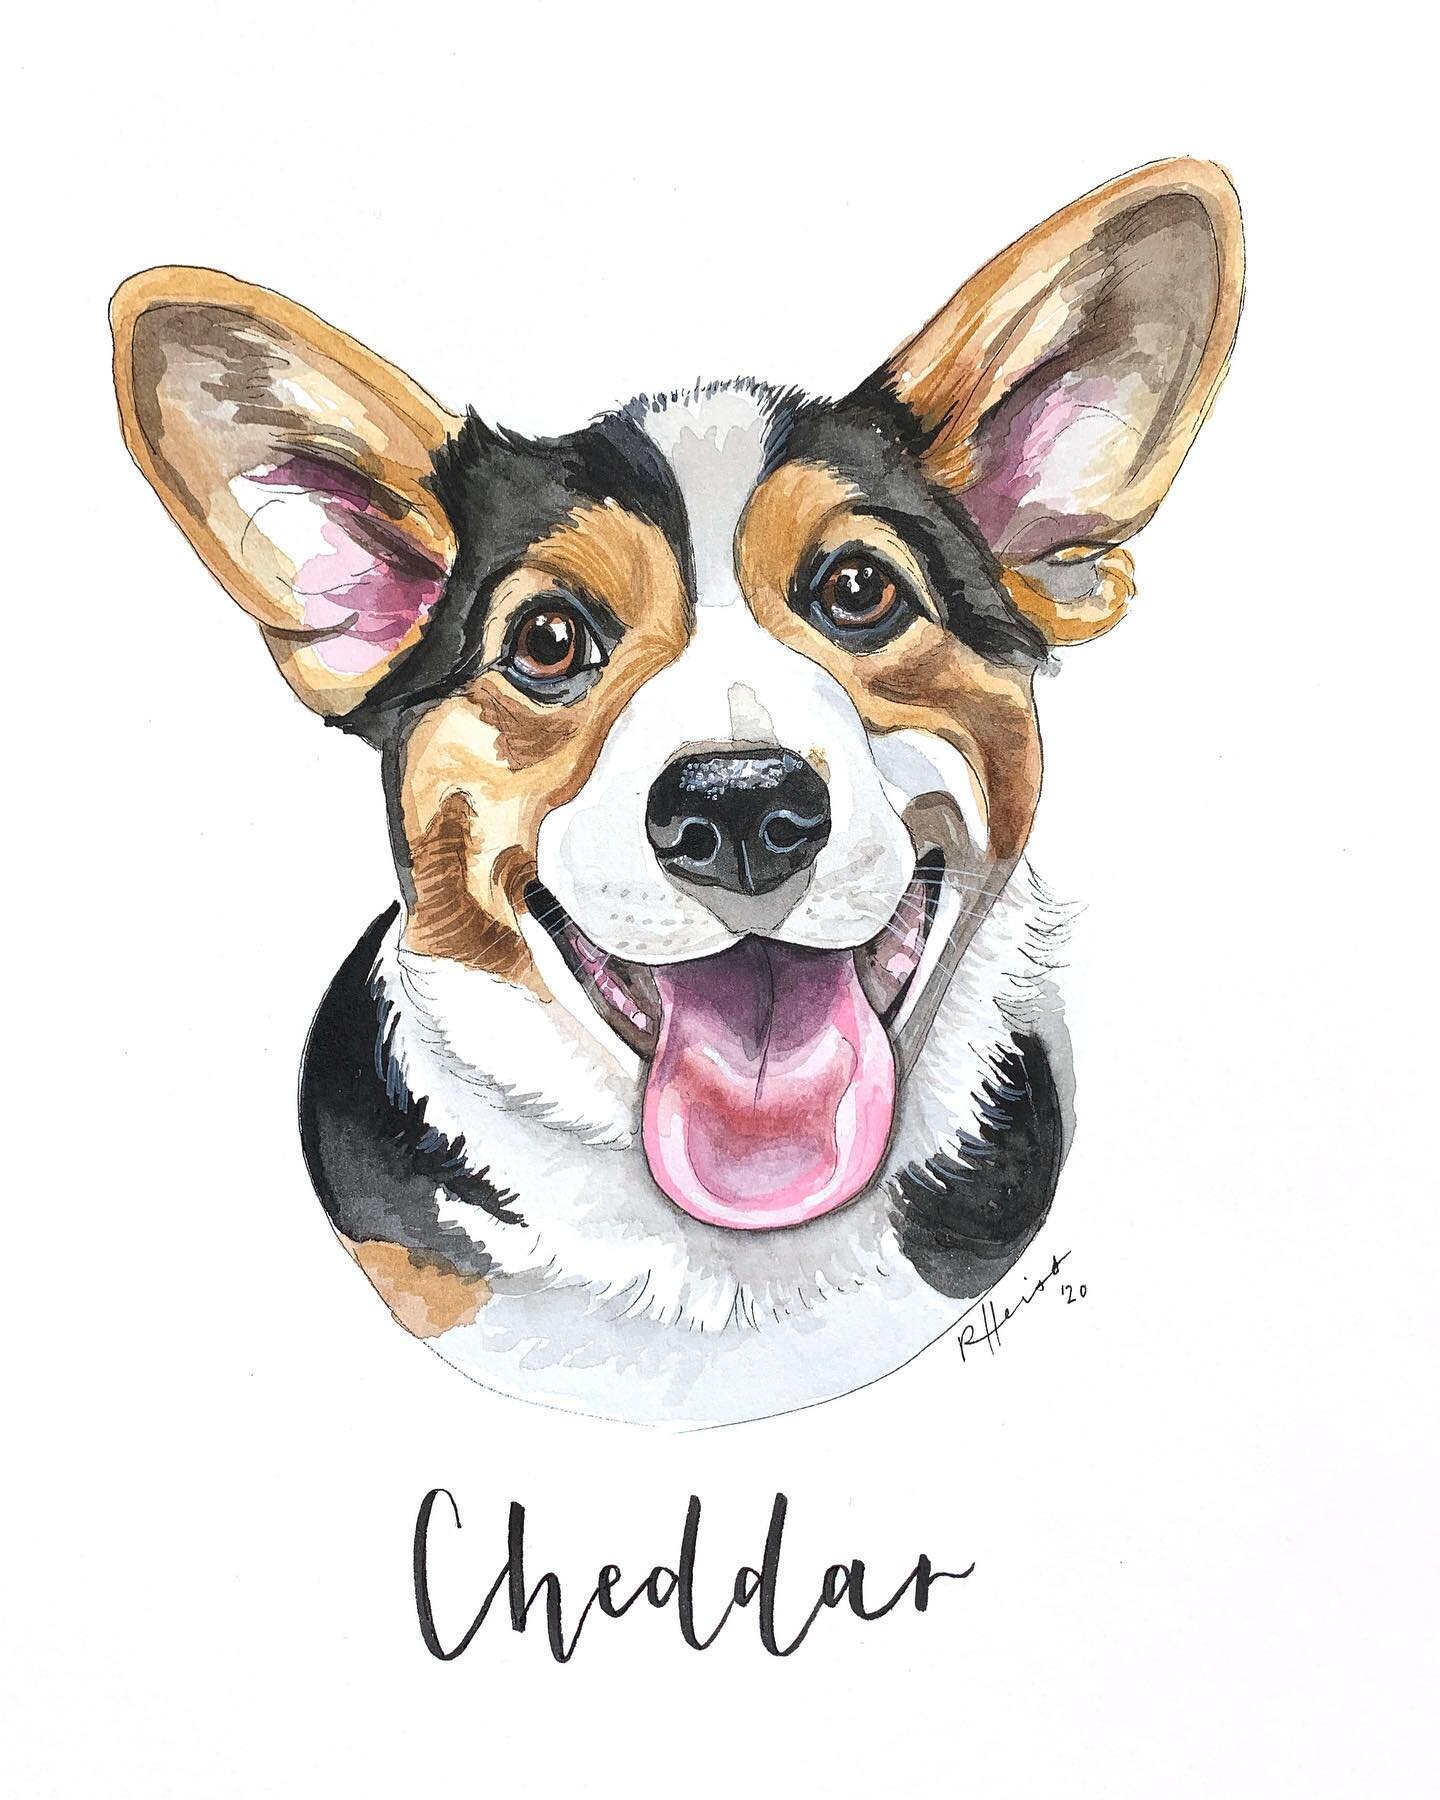 Happy Friday from my god dog Cheddar! Swipe for his irl smile 🥰 @cheddarbaconborker